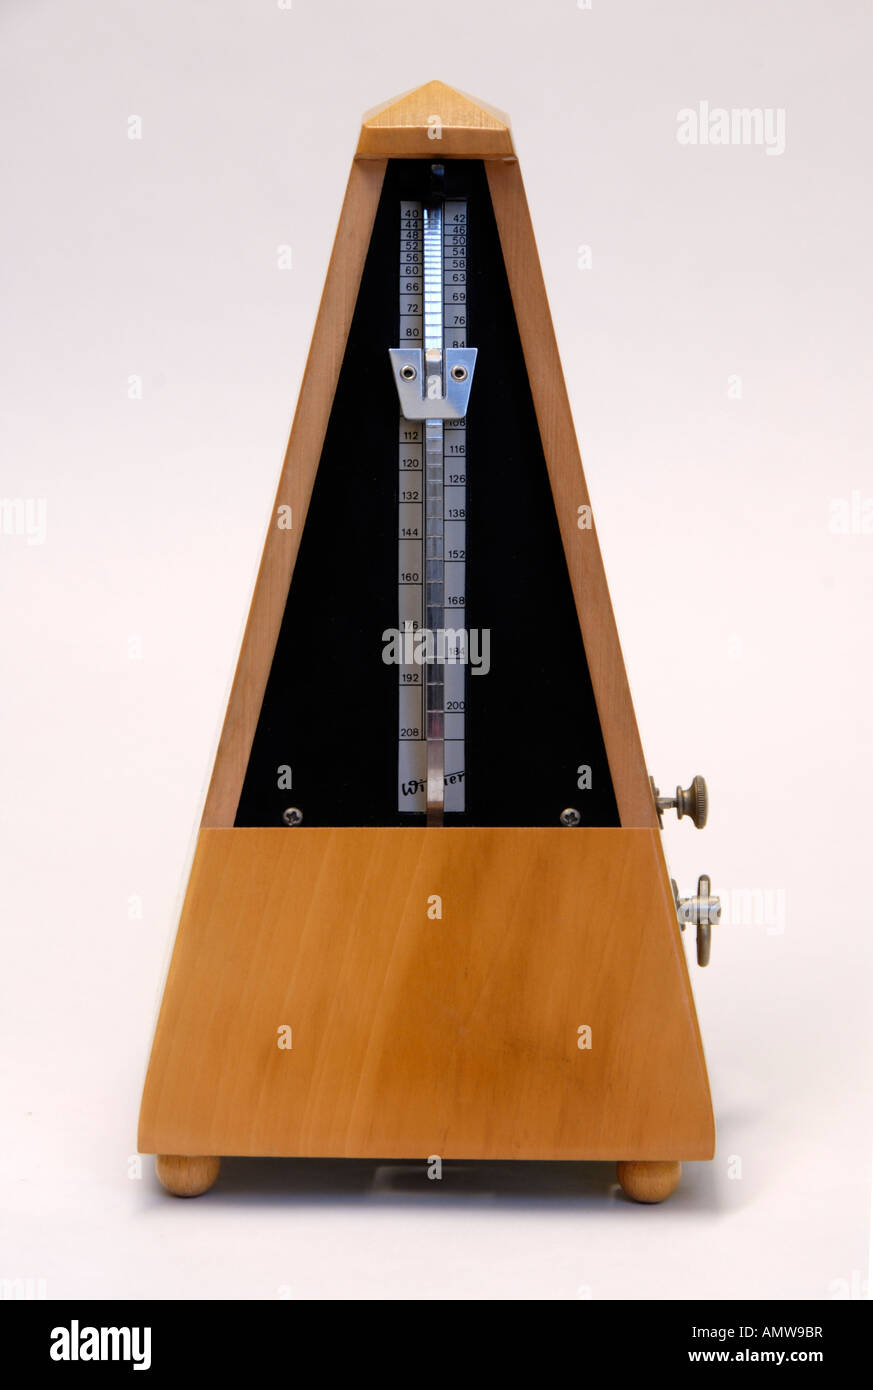 Wittner beechwood clockwork metronome with cover removed . Made in Germany  Stock Photo - Alamy